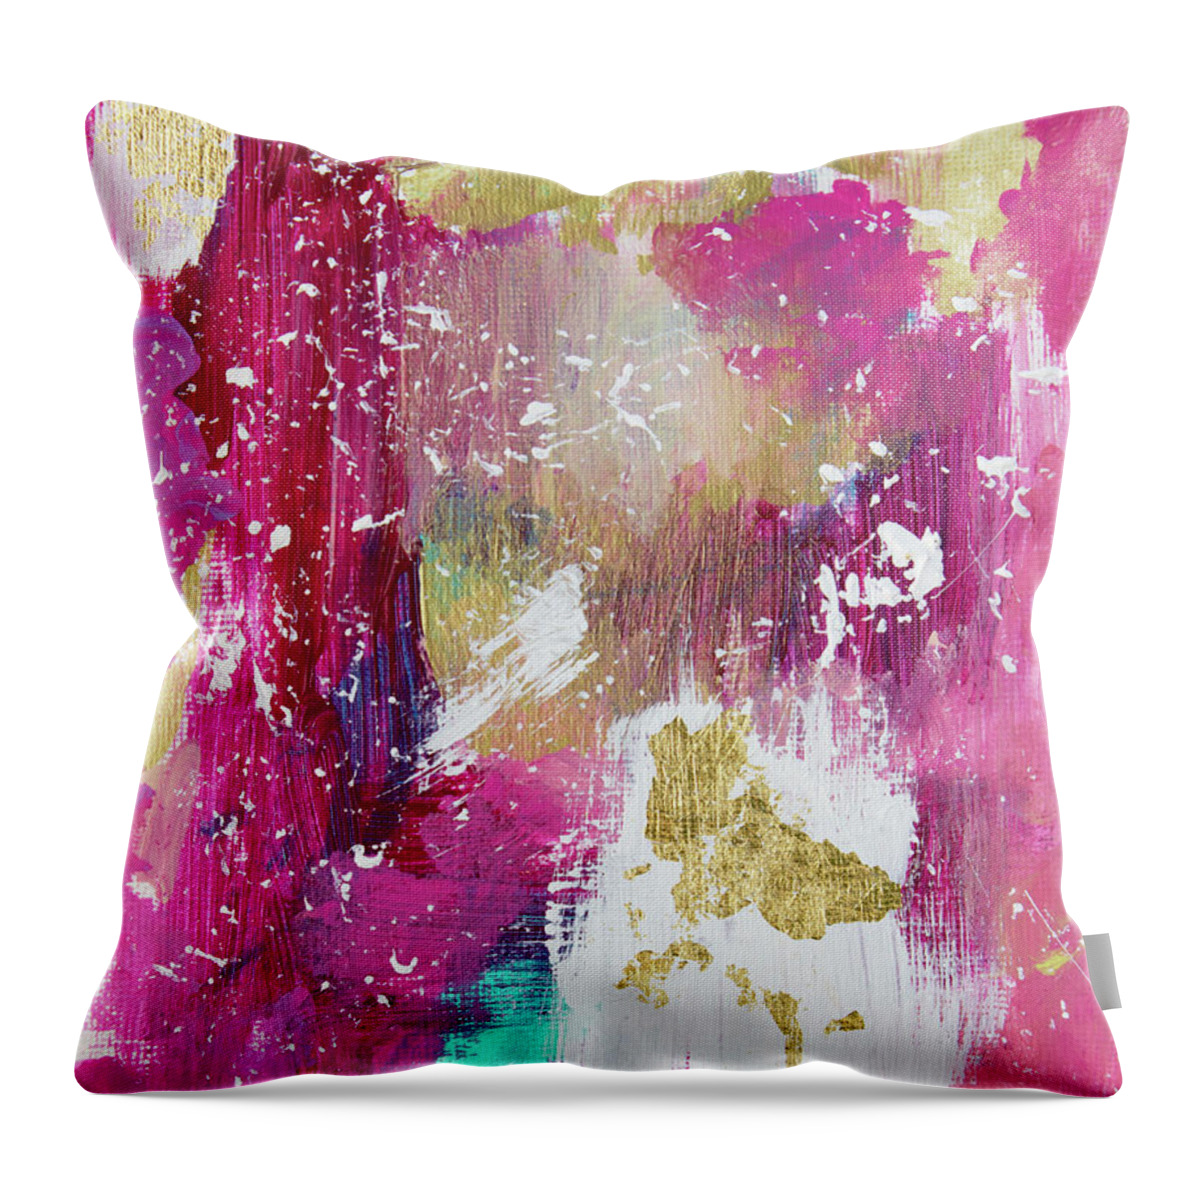 Pink Throw Pillow featuring the painting Pink Thoughts by Linh Nguyen-Ng